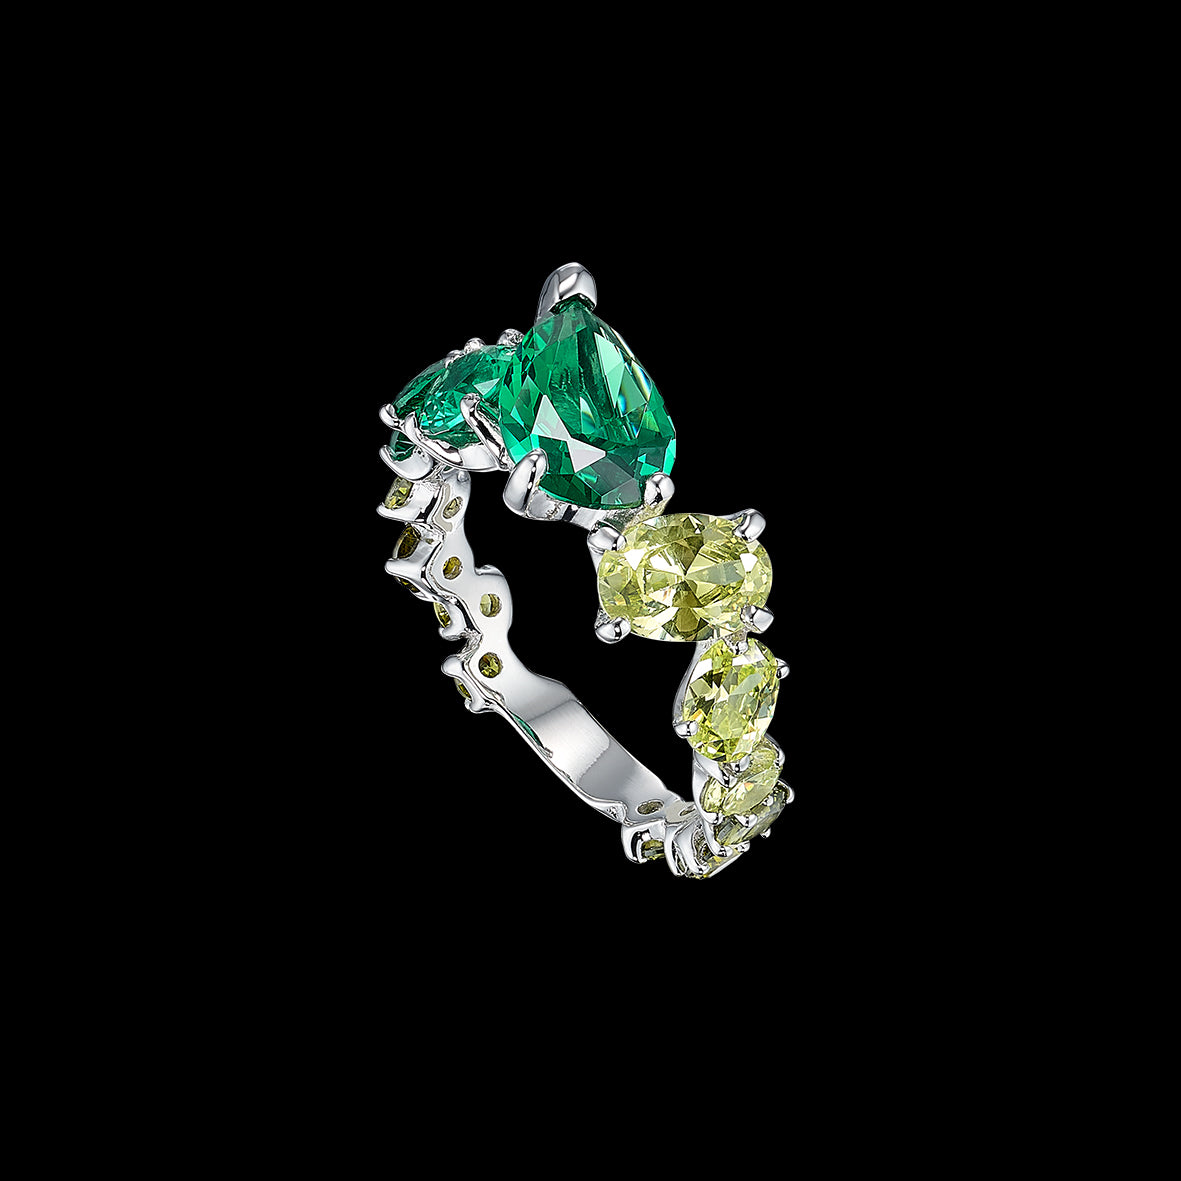 Emerald Ombré Nova Starburst Ring, Ring, Anabela Chan Joaillerie - Fine jewelry with laboratory grown and created gemstones hand-crafted in the United Kingdom. Anabela Chan Joaillerie is the first fine jewellery brand in the world to champion laboratory-grown and created gemstones with high jewellery design, artisanal craftsmanship and a focus on ethical and sustainable innovations.